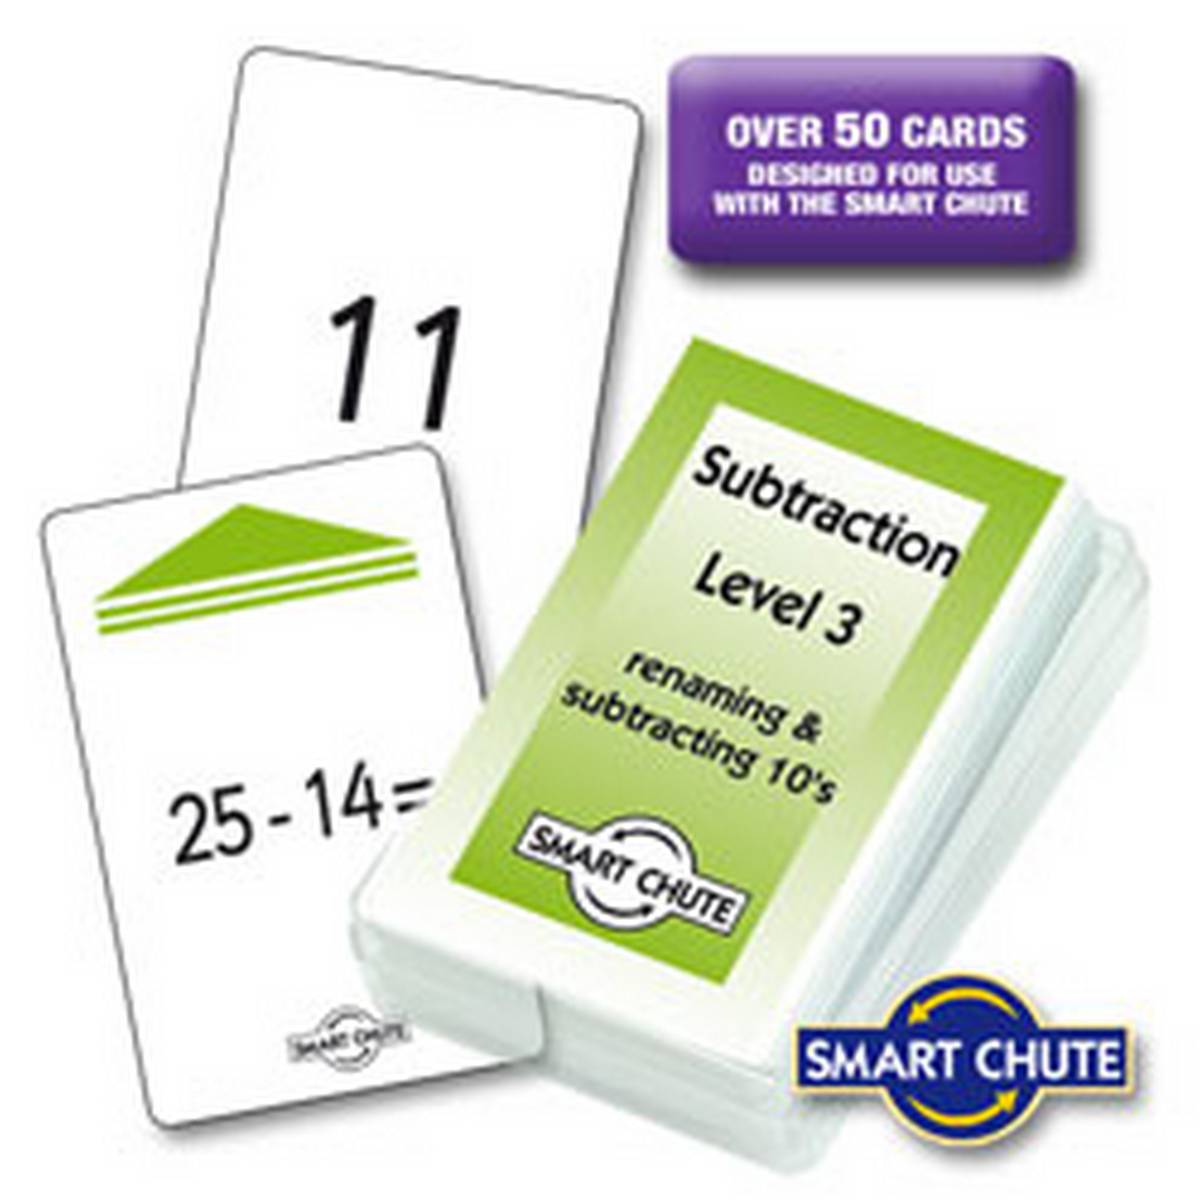 Subtraction Facts Chute Cards - Level 3